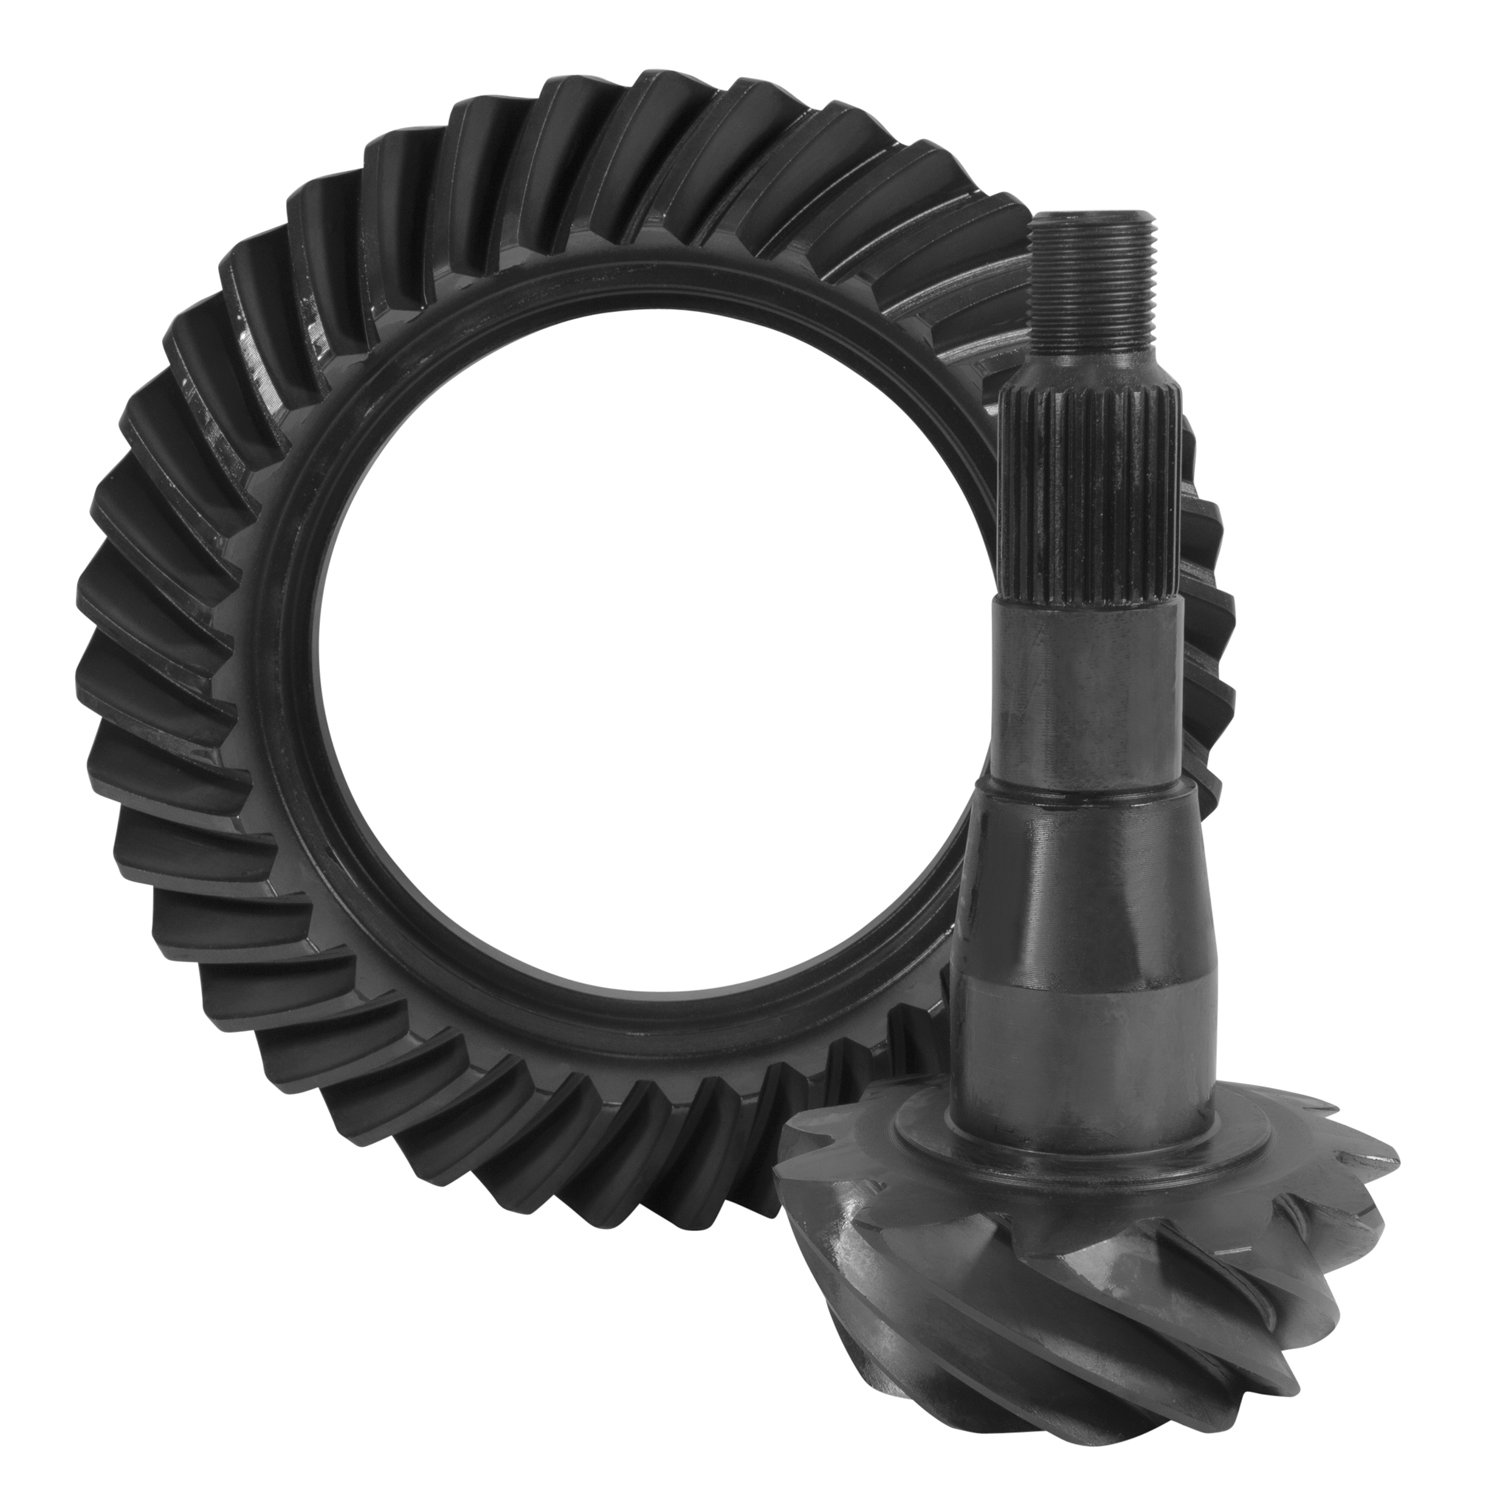 USA Standard ZG C9.25-355 Ring & Pinion Gear Set, For '10 & Down Chrysler 9.25 in., 3.55 Ratio